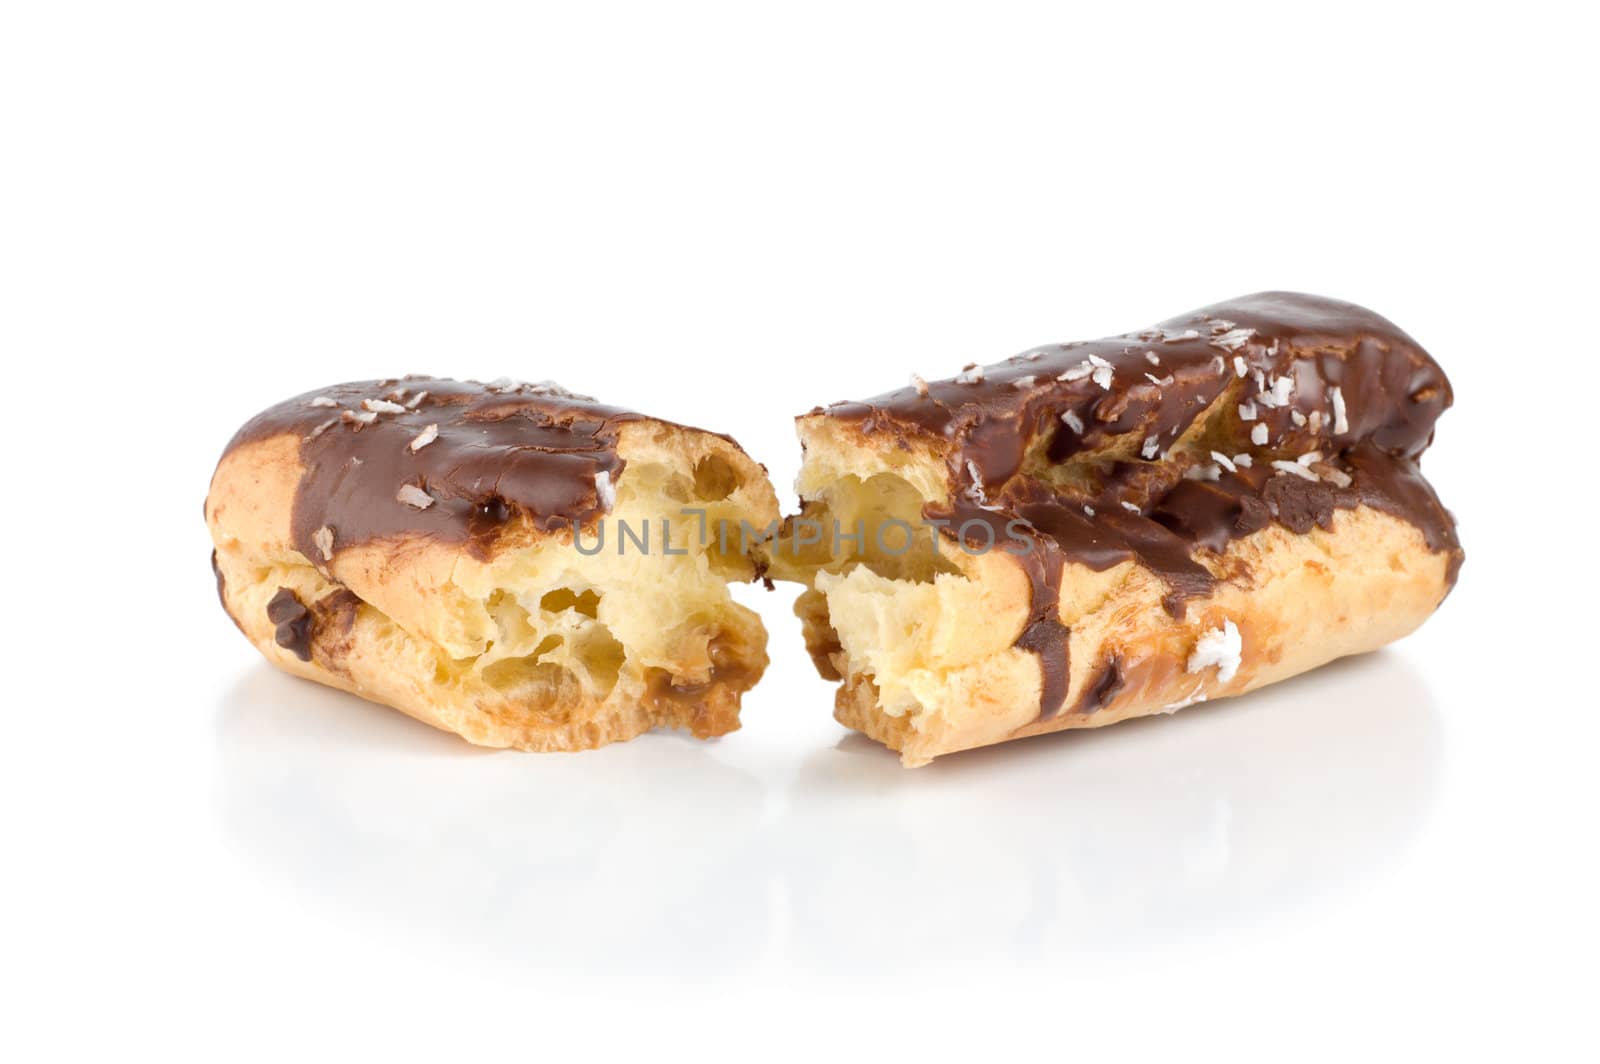 Chocolate eclair isolated on a white background